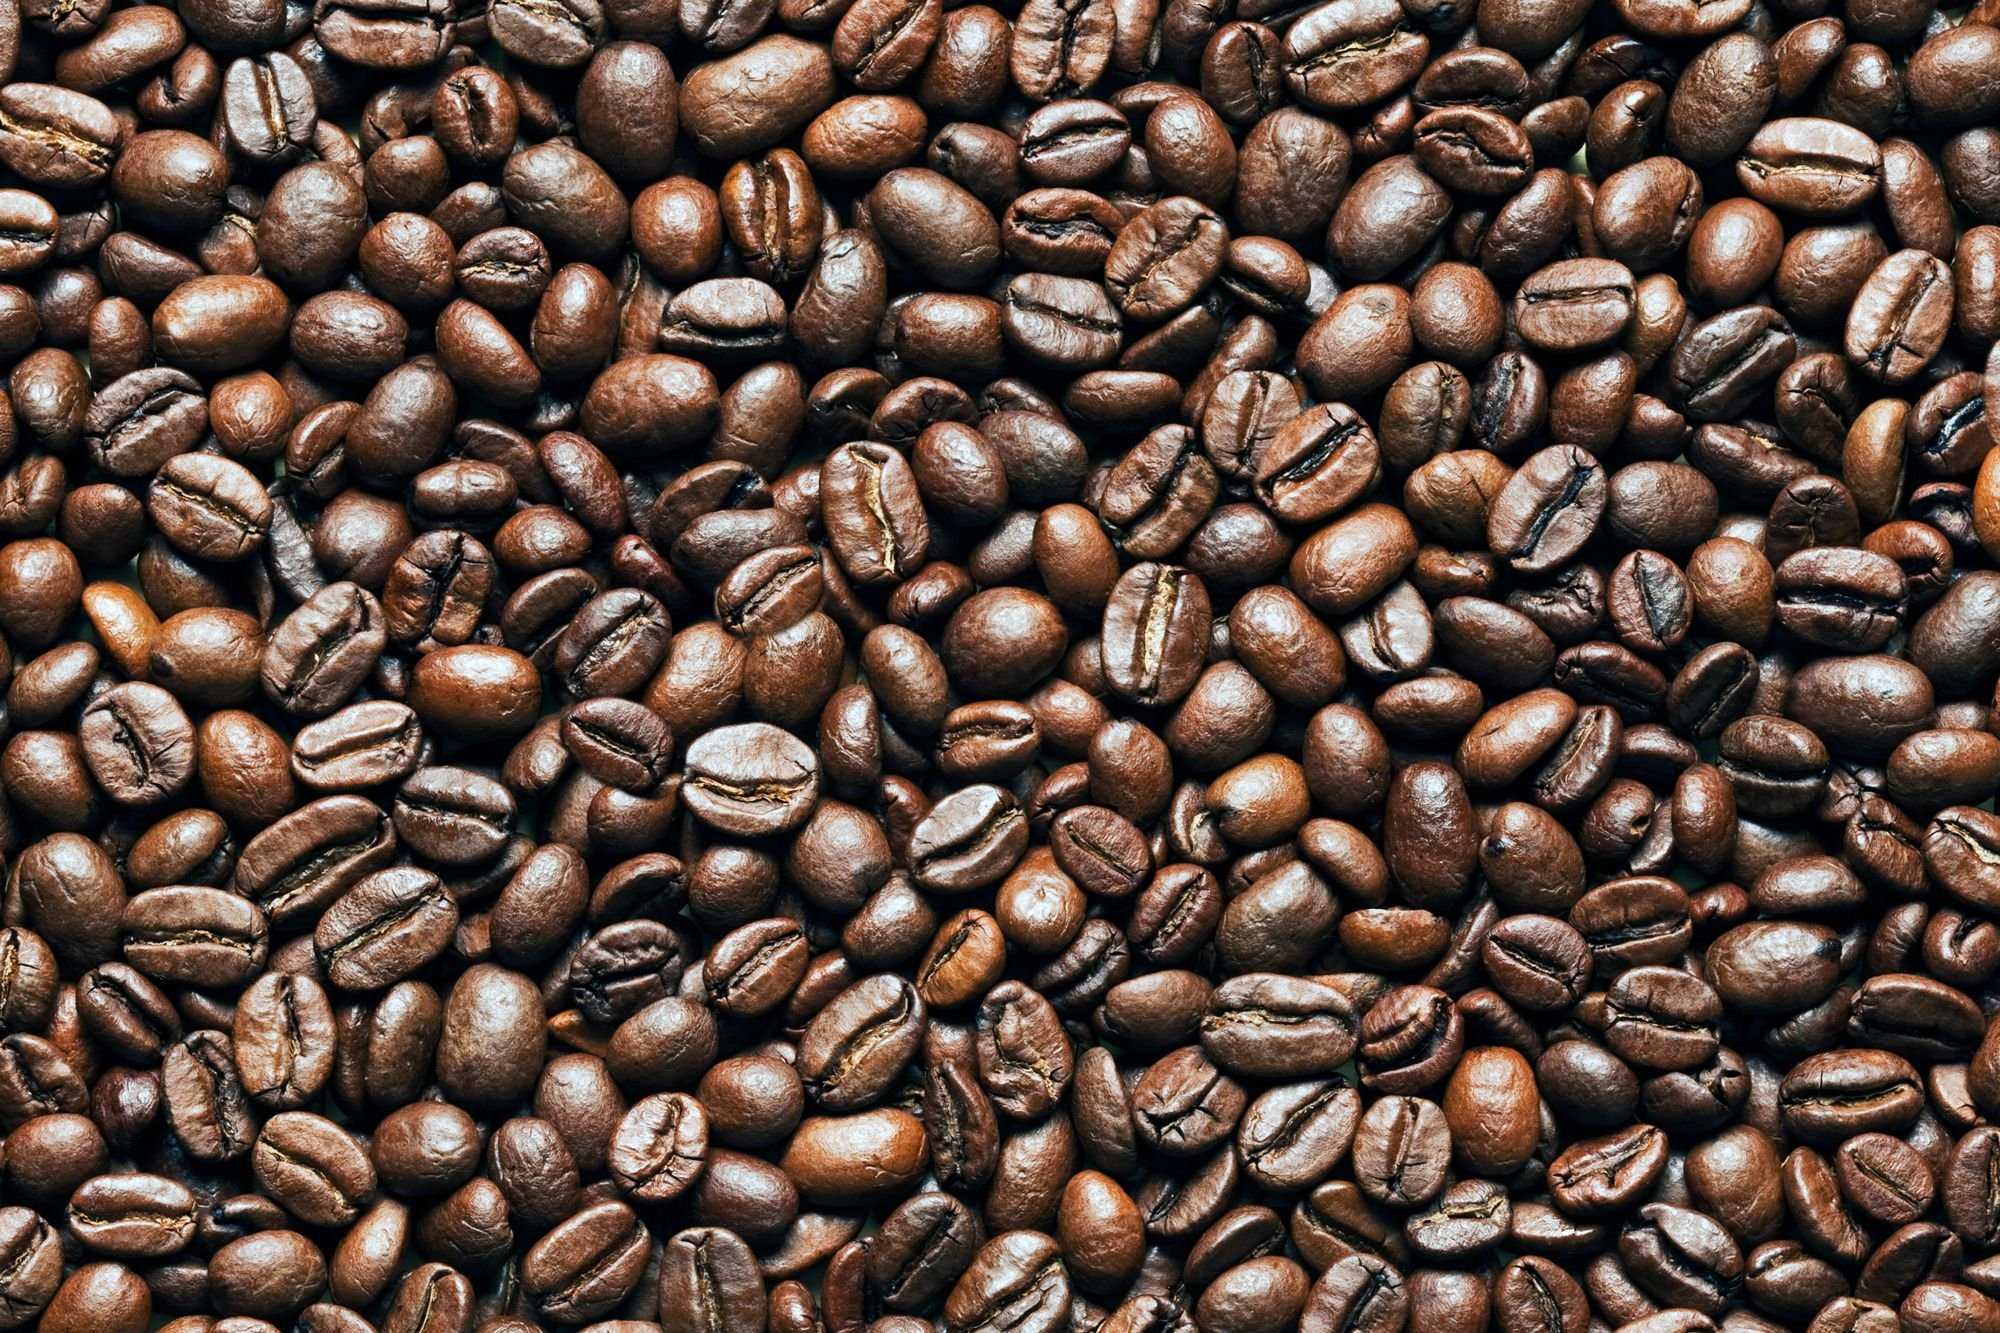 How to Store Coffee Beans So They Stay as Fresh as Possible